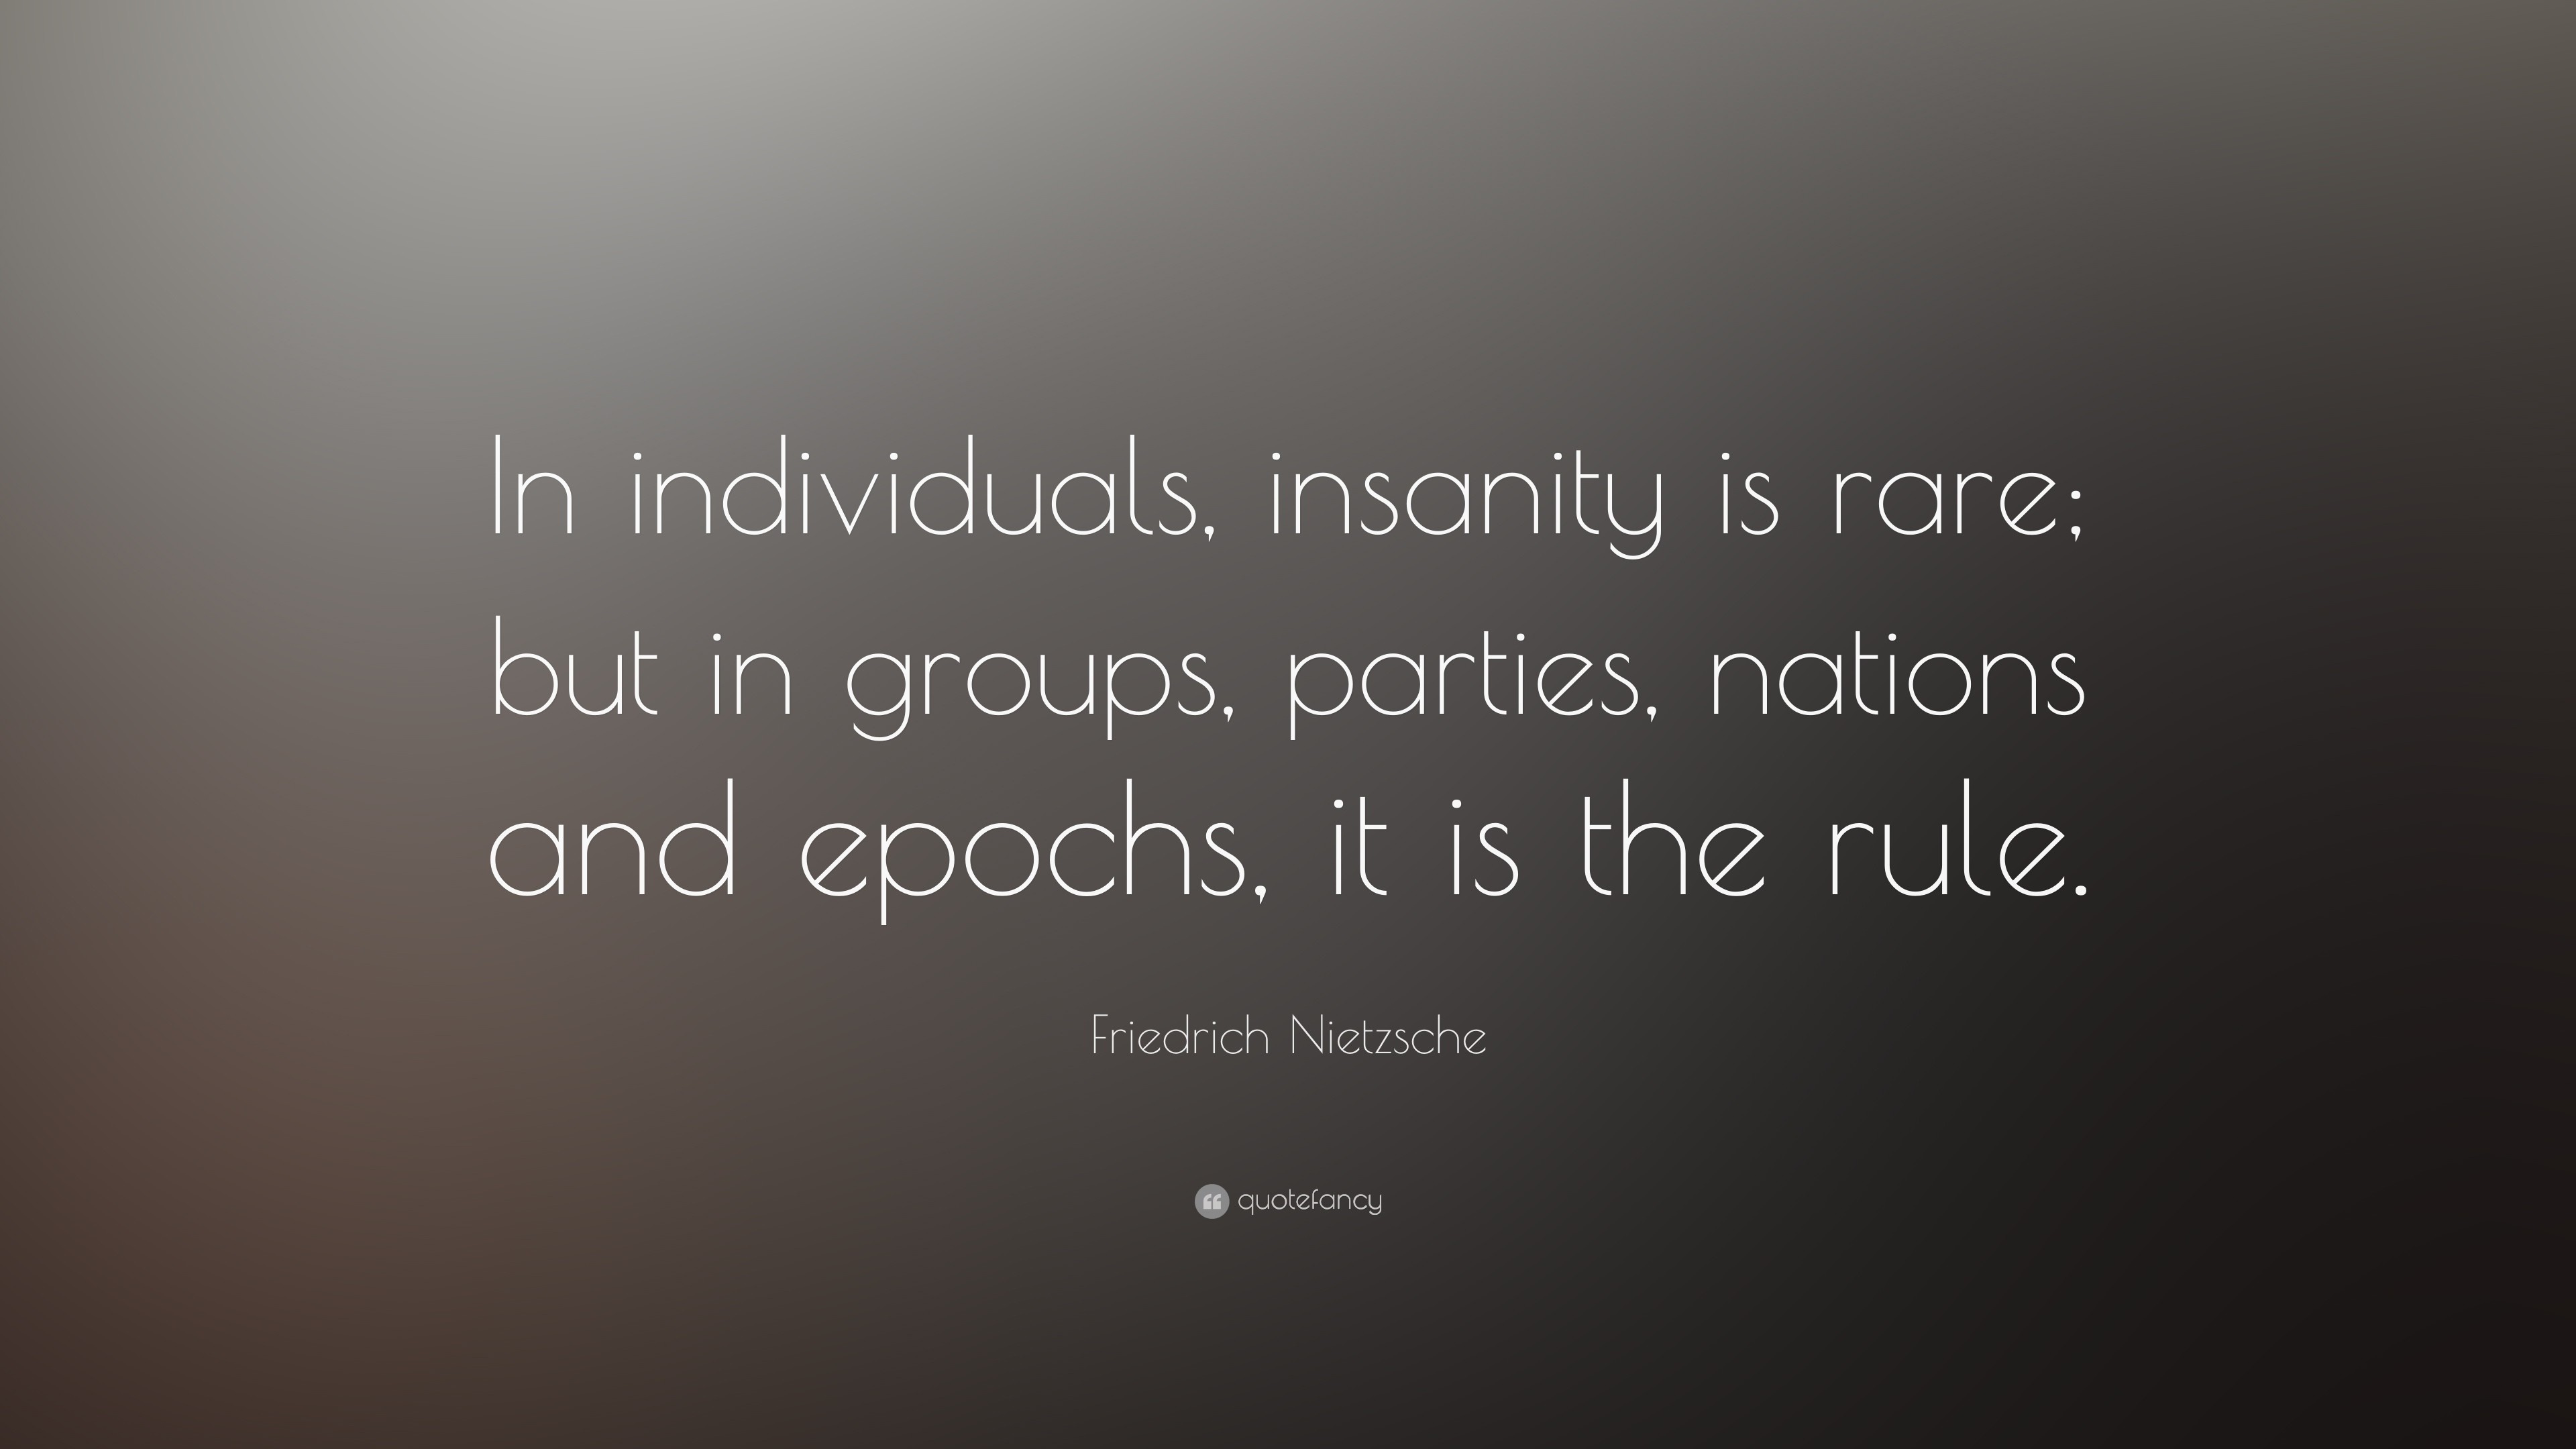 3840x2160 Friedrich Nietzsche Quote: “In individuals, insanity is rare; but in groups,